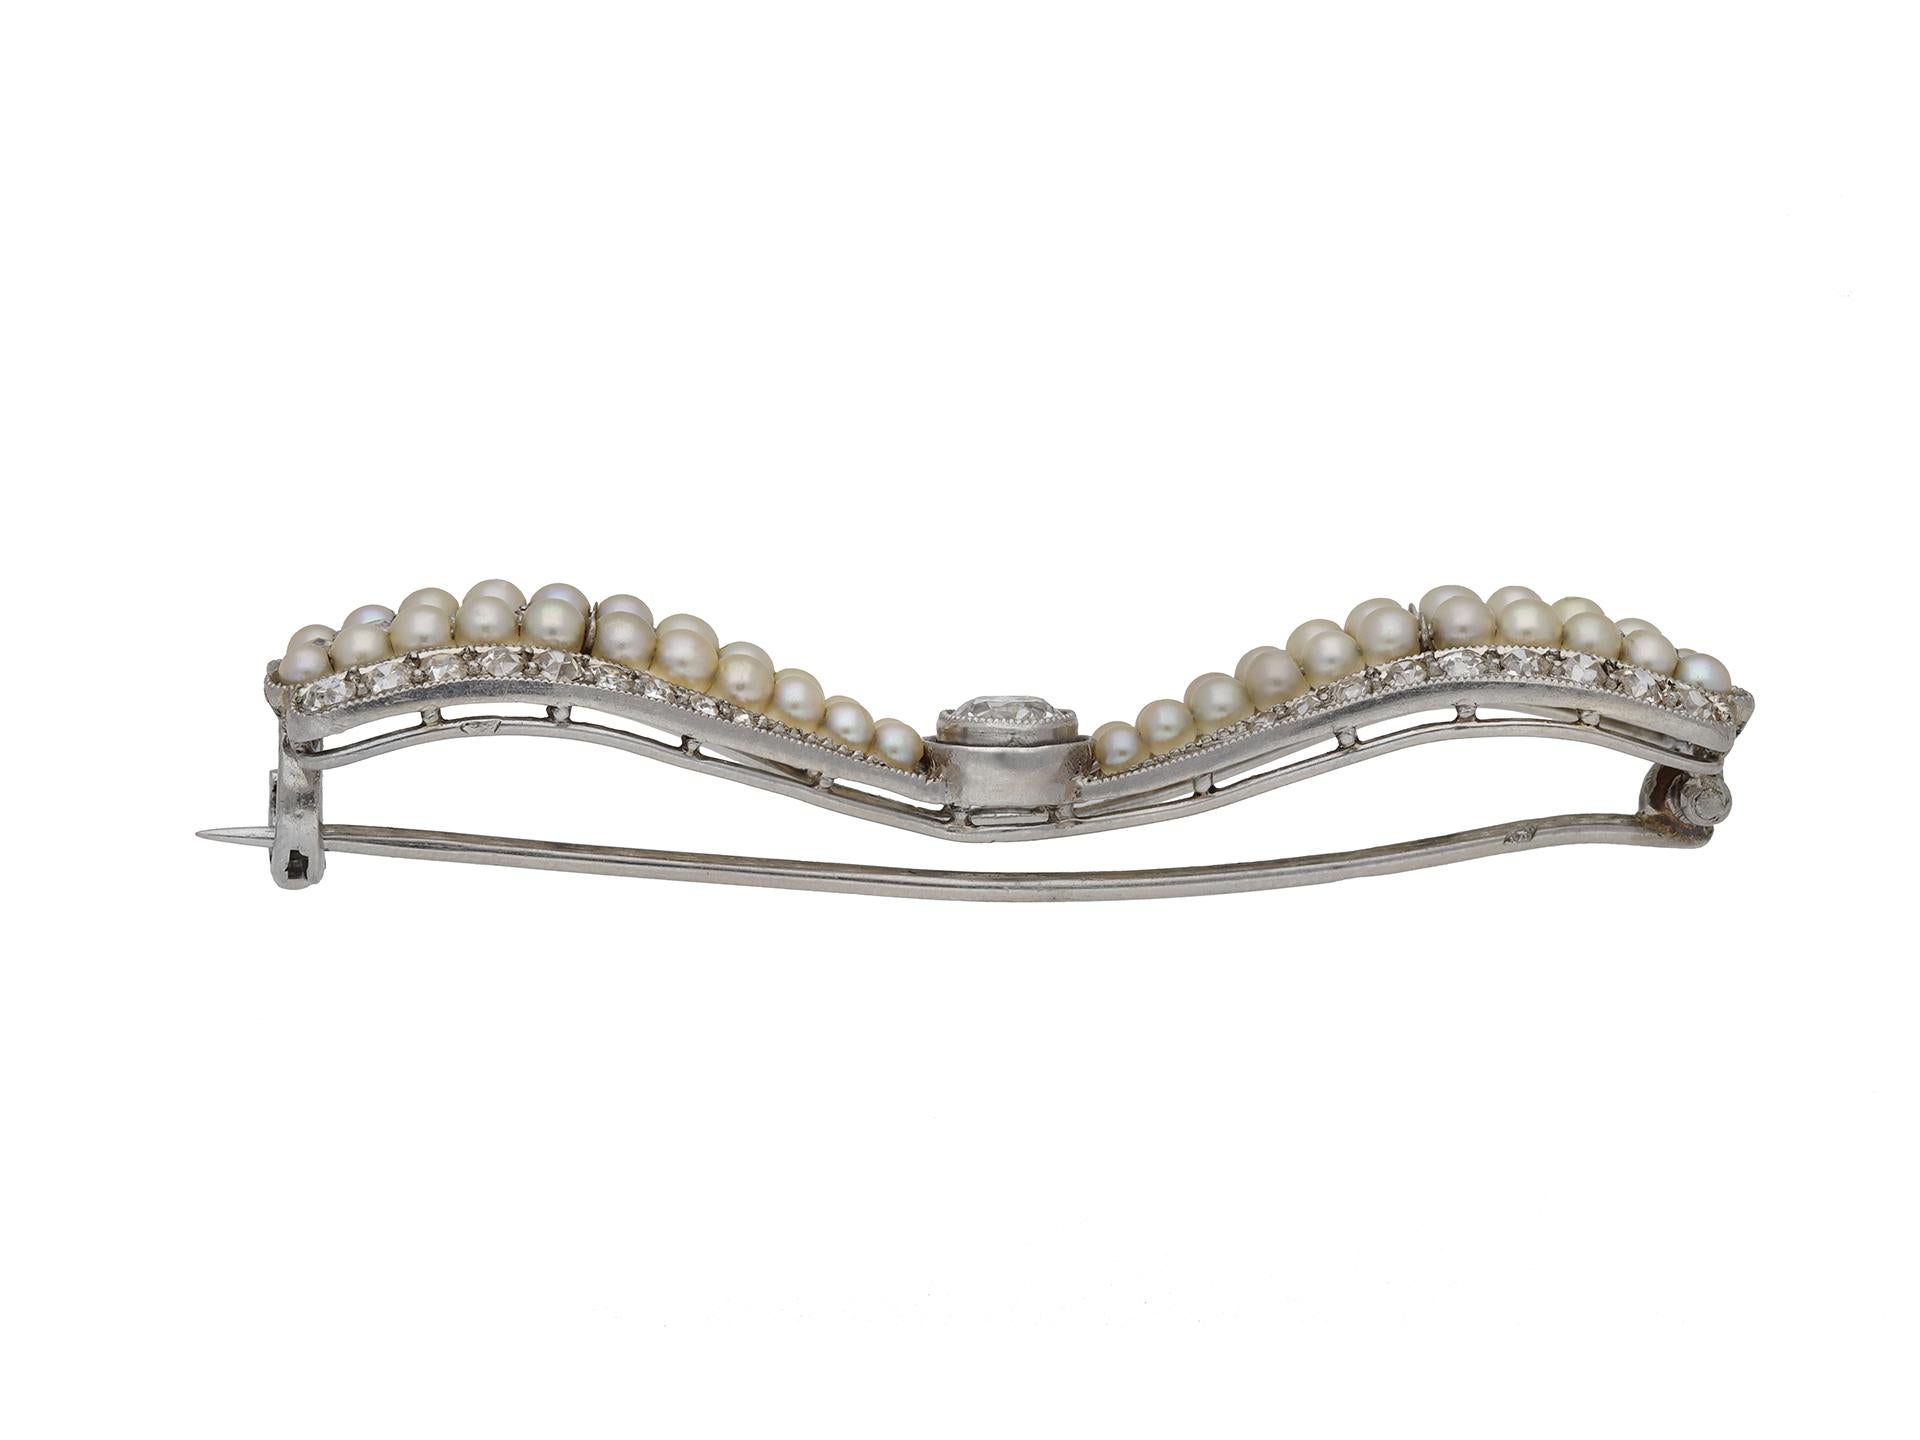 Antique pearl and diamond bow brooch. Set with a central round old cut diamond in an open back rubover setting with a weight of 0.25 carats, leading out to a triple row of fifty four round old cut diamonds with a combined weight of 1.50 carats and a